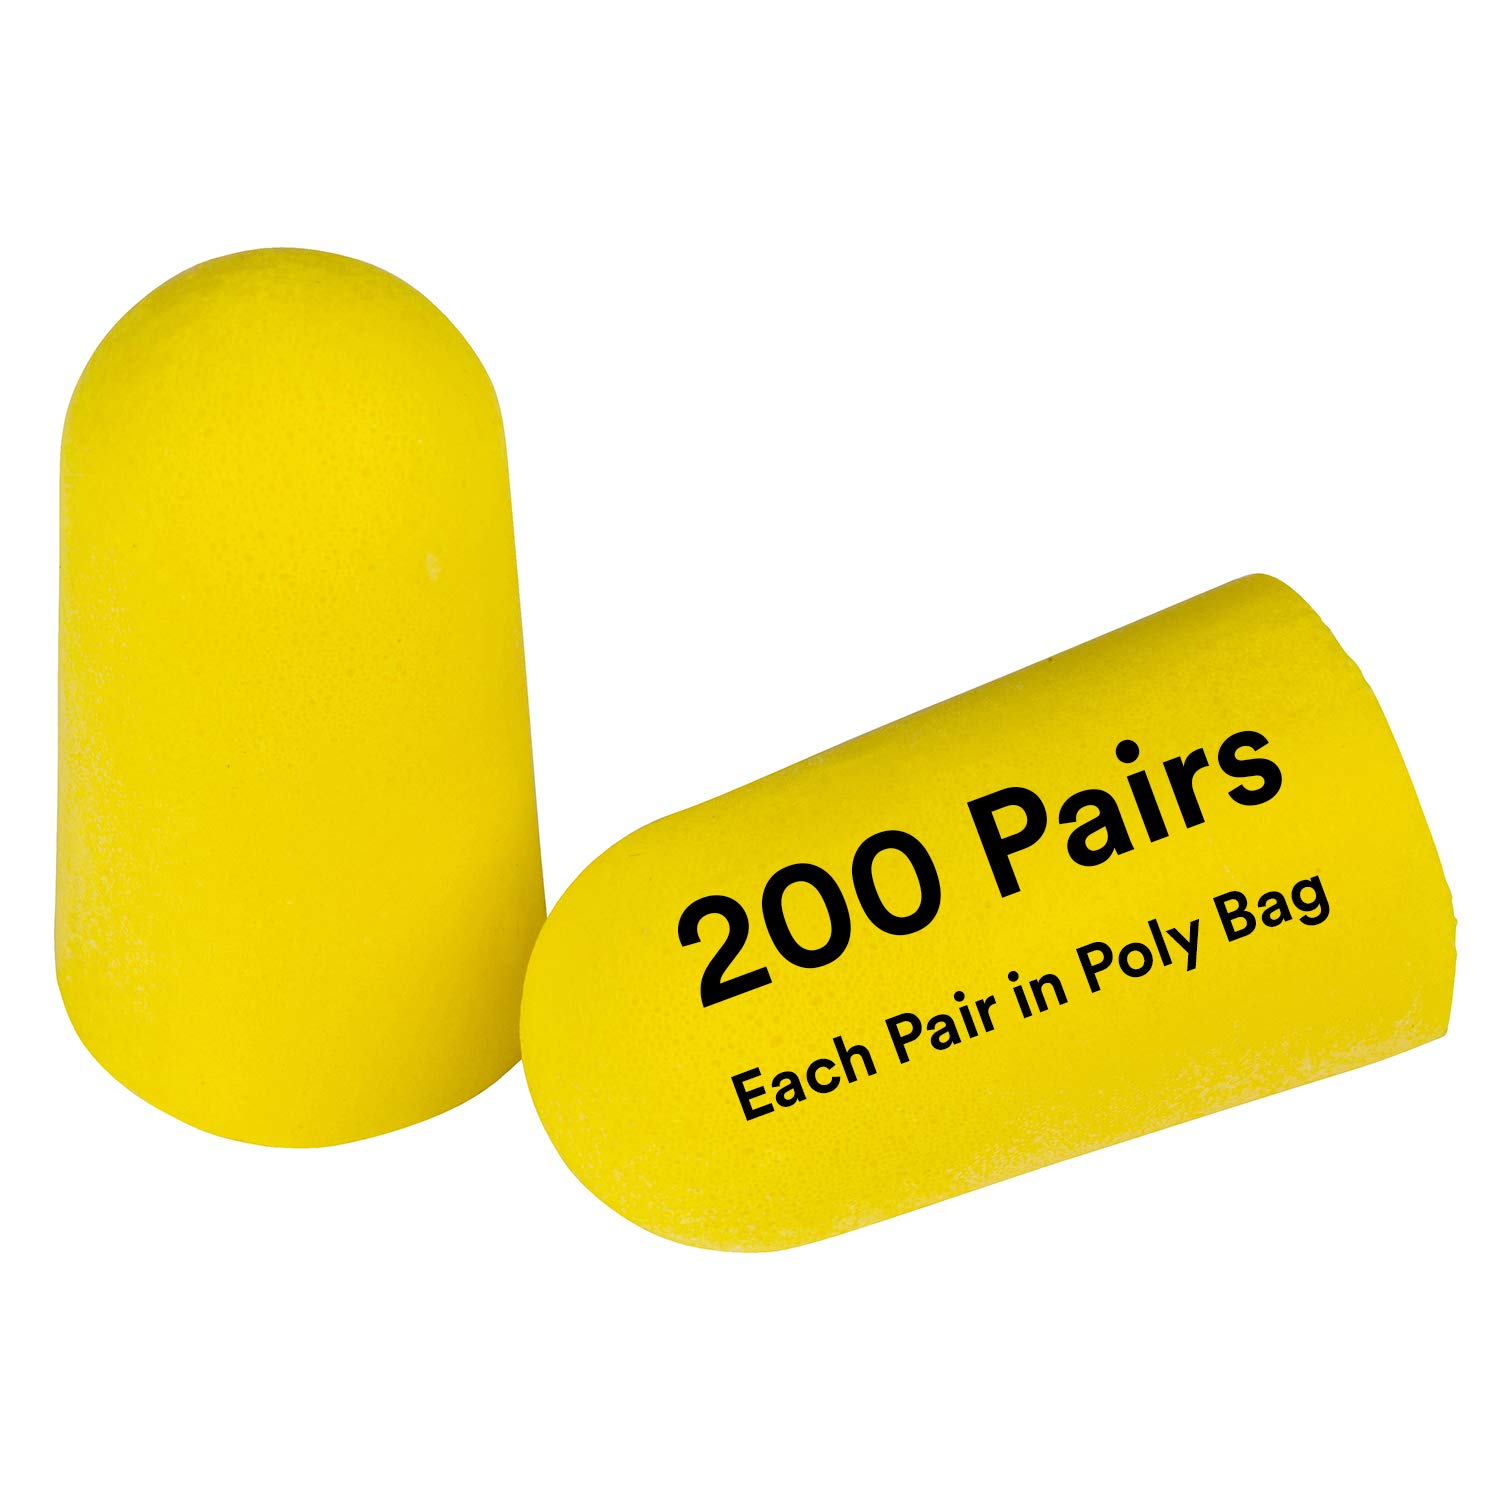 3M Ear Plugs, 200/Box, E-A-R TaperFit2 312-1219, Uncorded, Disposable, Foam, NRR 32, For Drilling, Grinding, Machining, Sawing, Sanding, Welding, 1 Pair/Poly Bag,Yellow